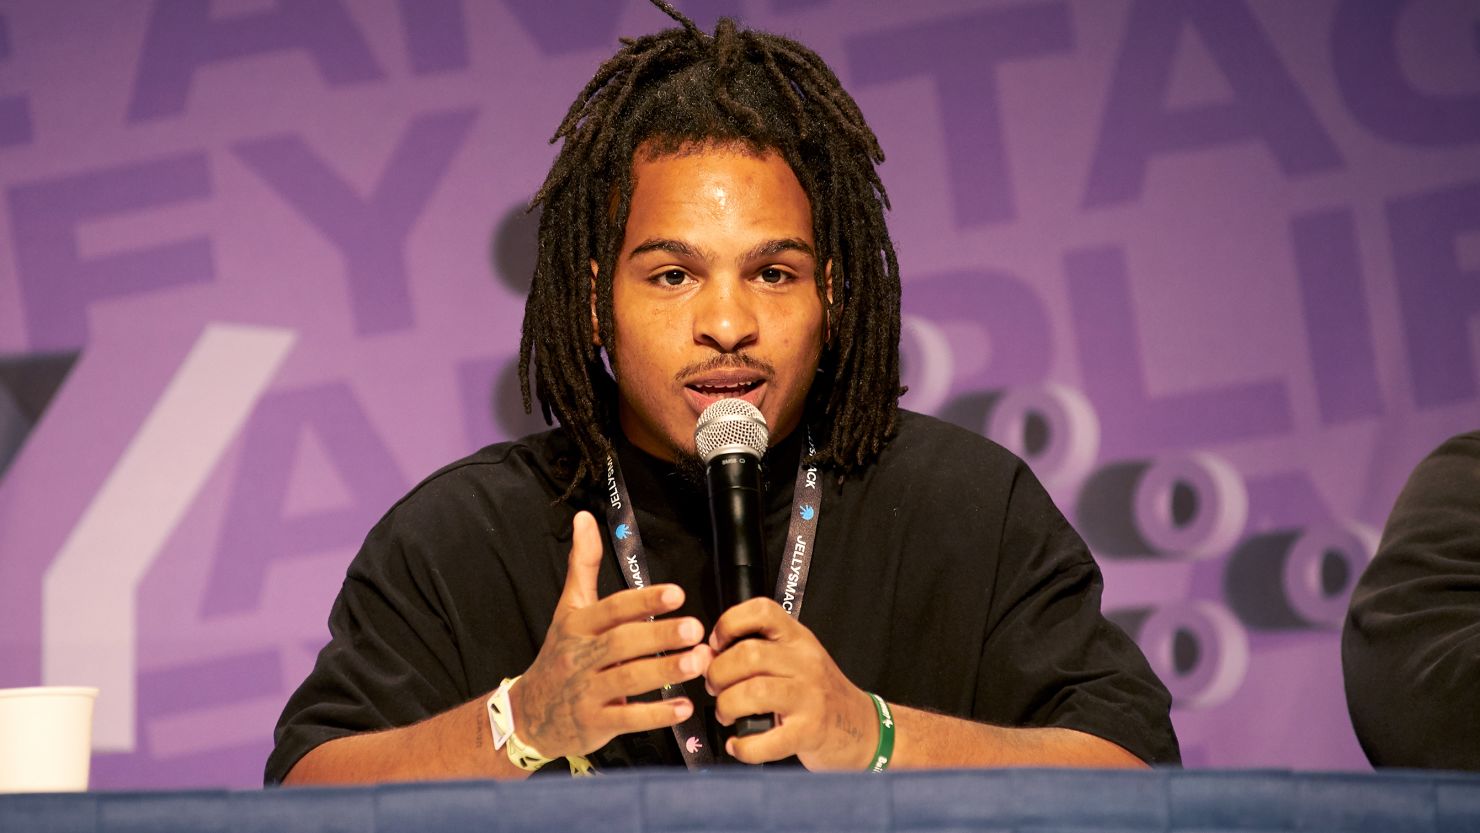 Keith Lee speaks onstage at VidCon Anaheim 2023 at the Anaheim Convention Center on June 23, 2023 in Anaheim, California.